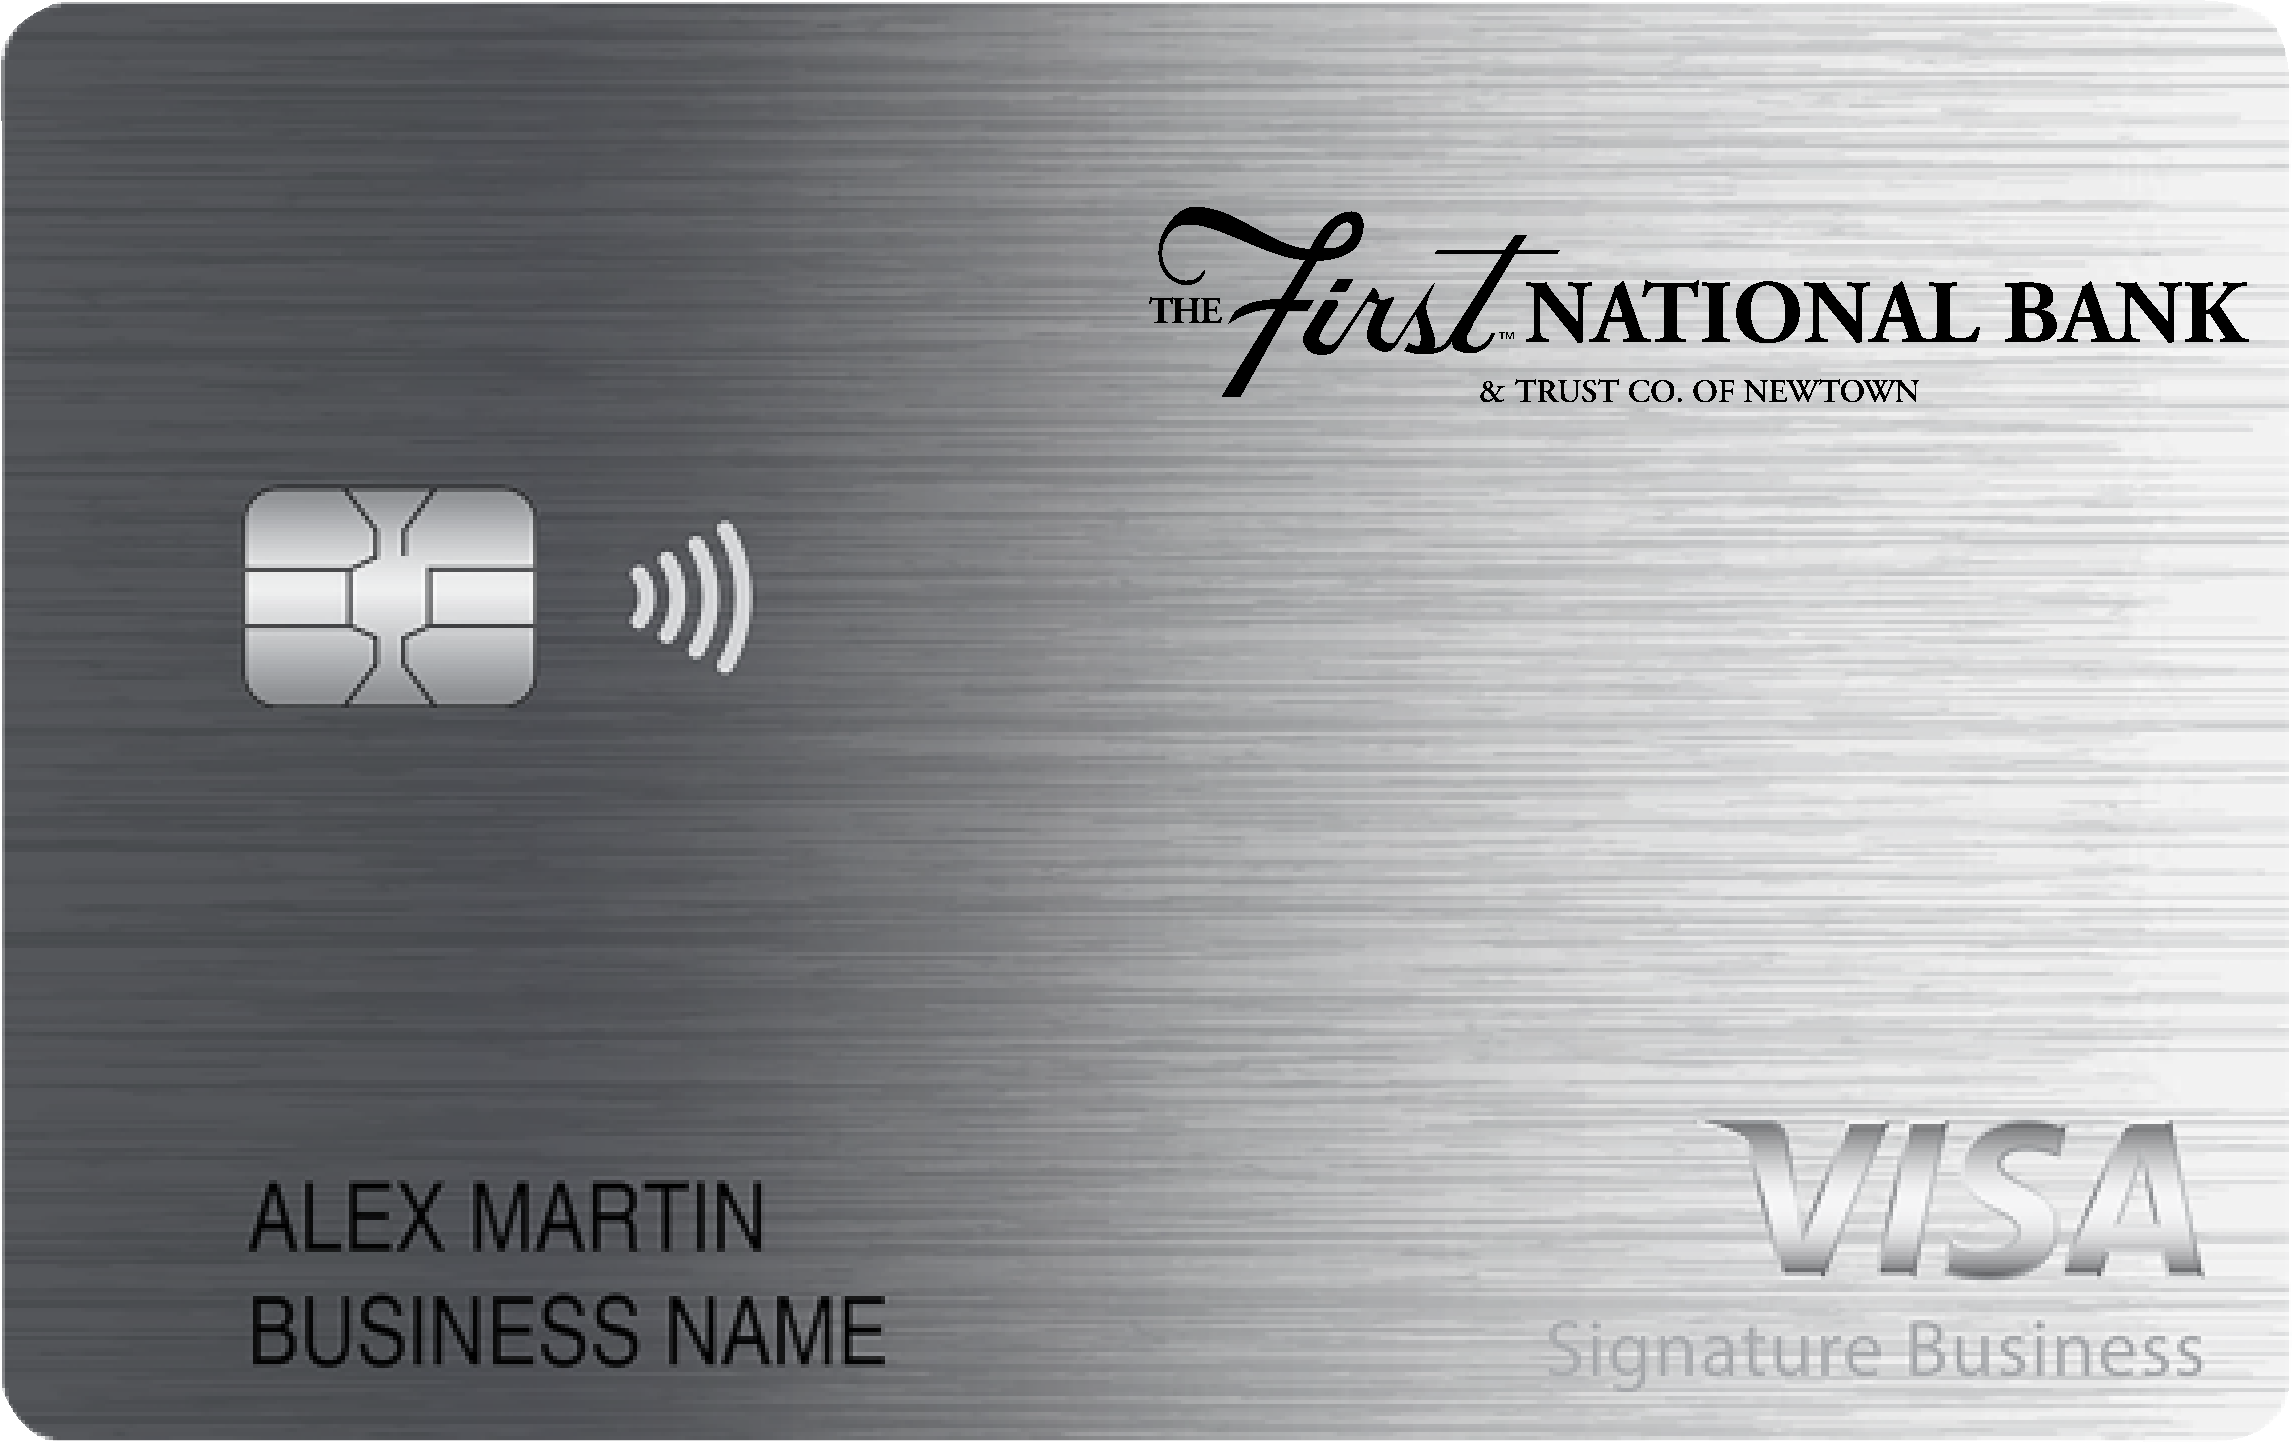 The First National Bank & Trust Company Smart Business Rewards Card